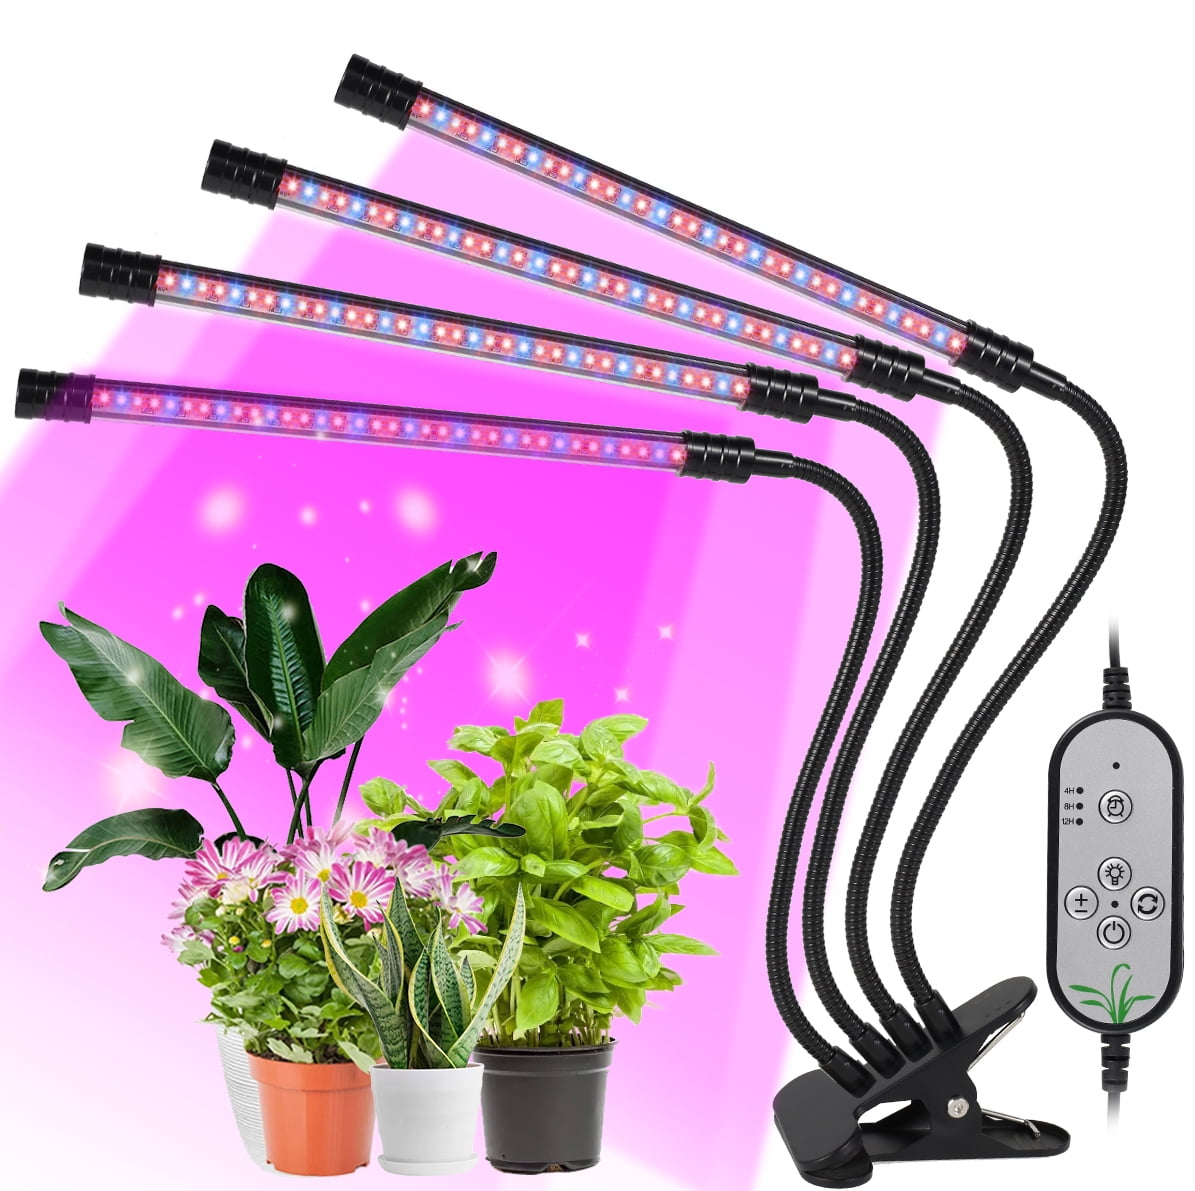 Dimmable 1/2/3/4 Ring Light-Head USB LED Plant Grow Light Lamp for Indoor Plants 